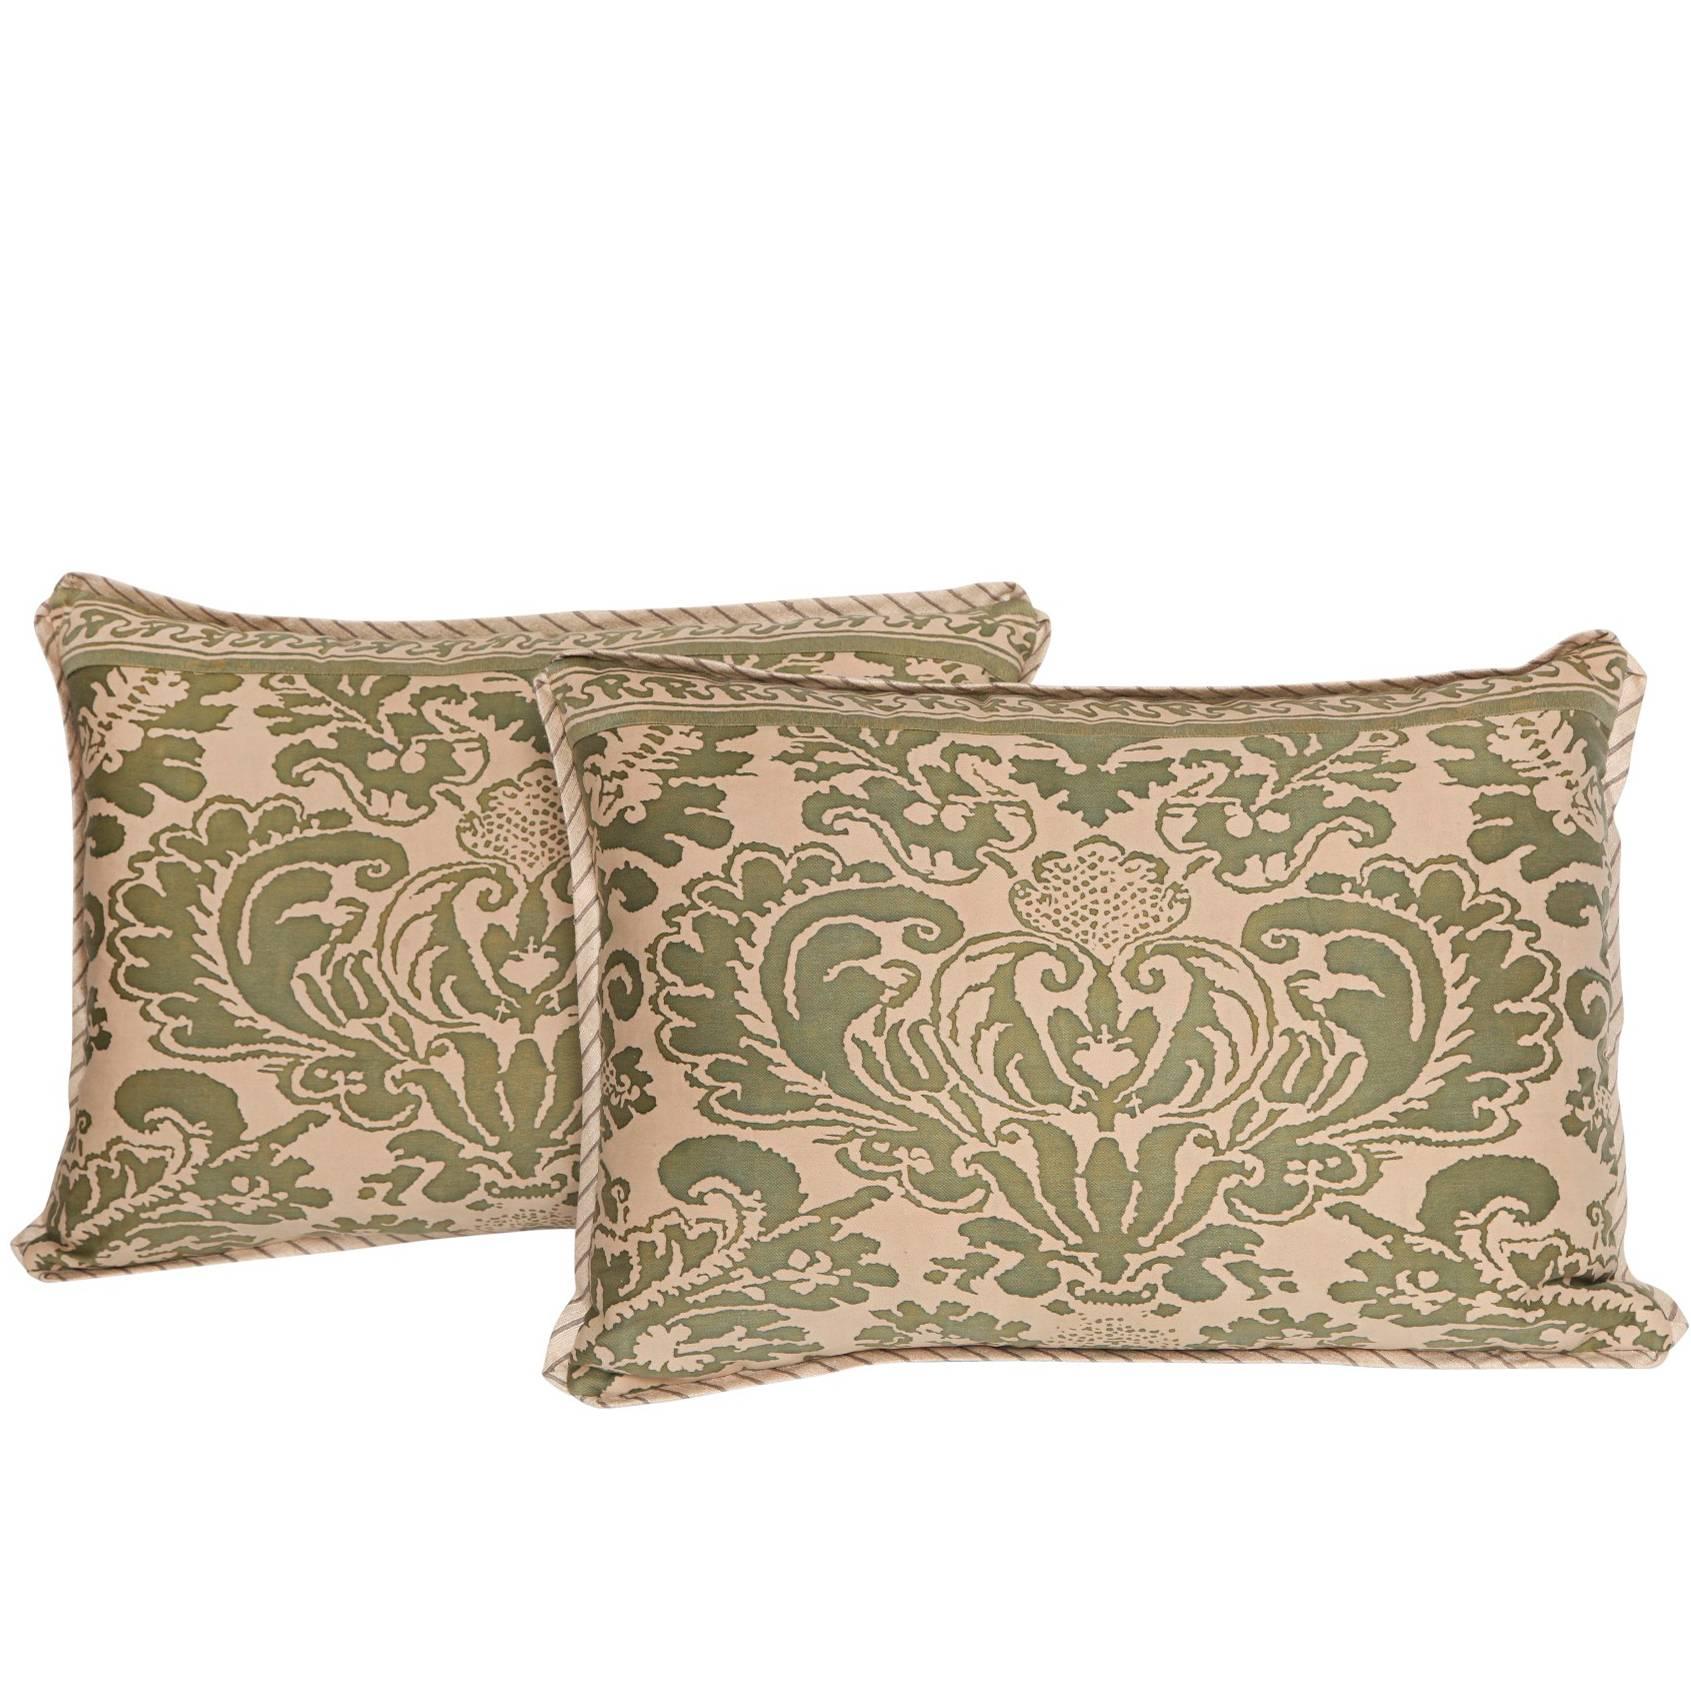 A Pair of Fortuny Fabric Cushions in the Sevigne Pattern